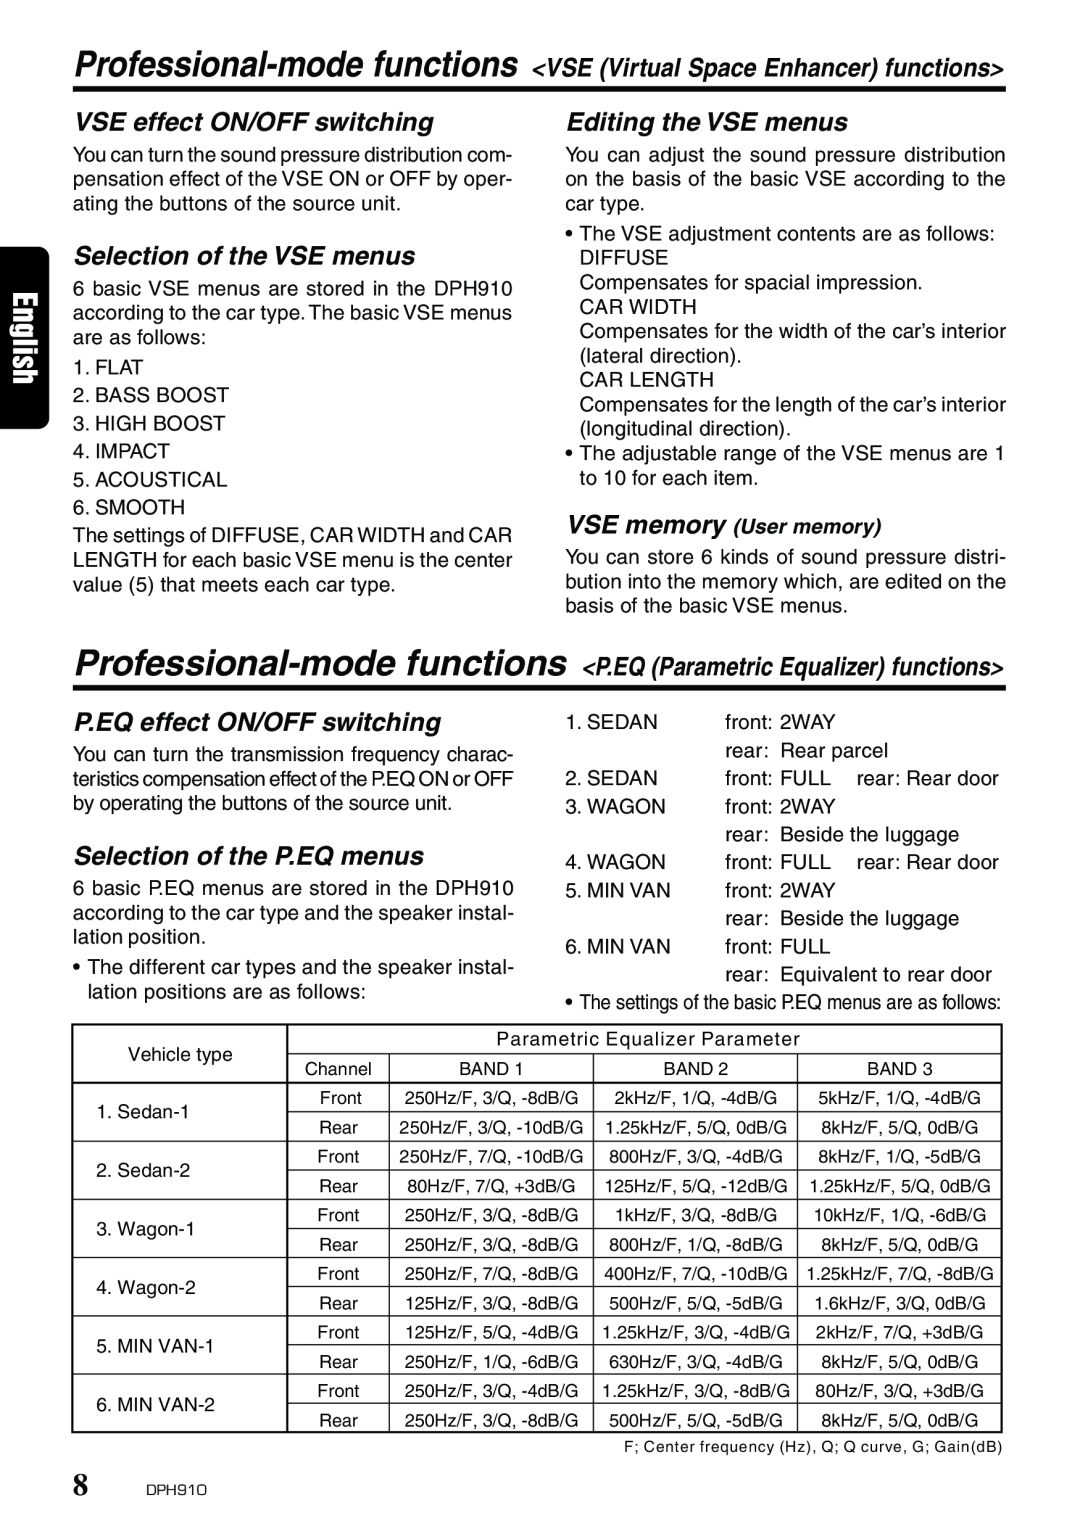 Clarion DPH910 owner manual VSE effect ON/OFF switching, Selection of the VSE menus, VSE Virtual Space Enhancer functions 